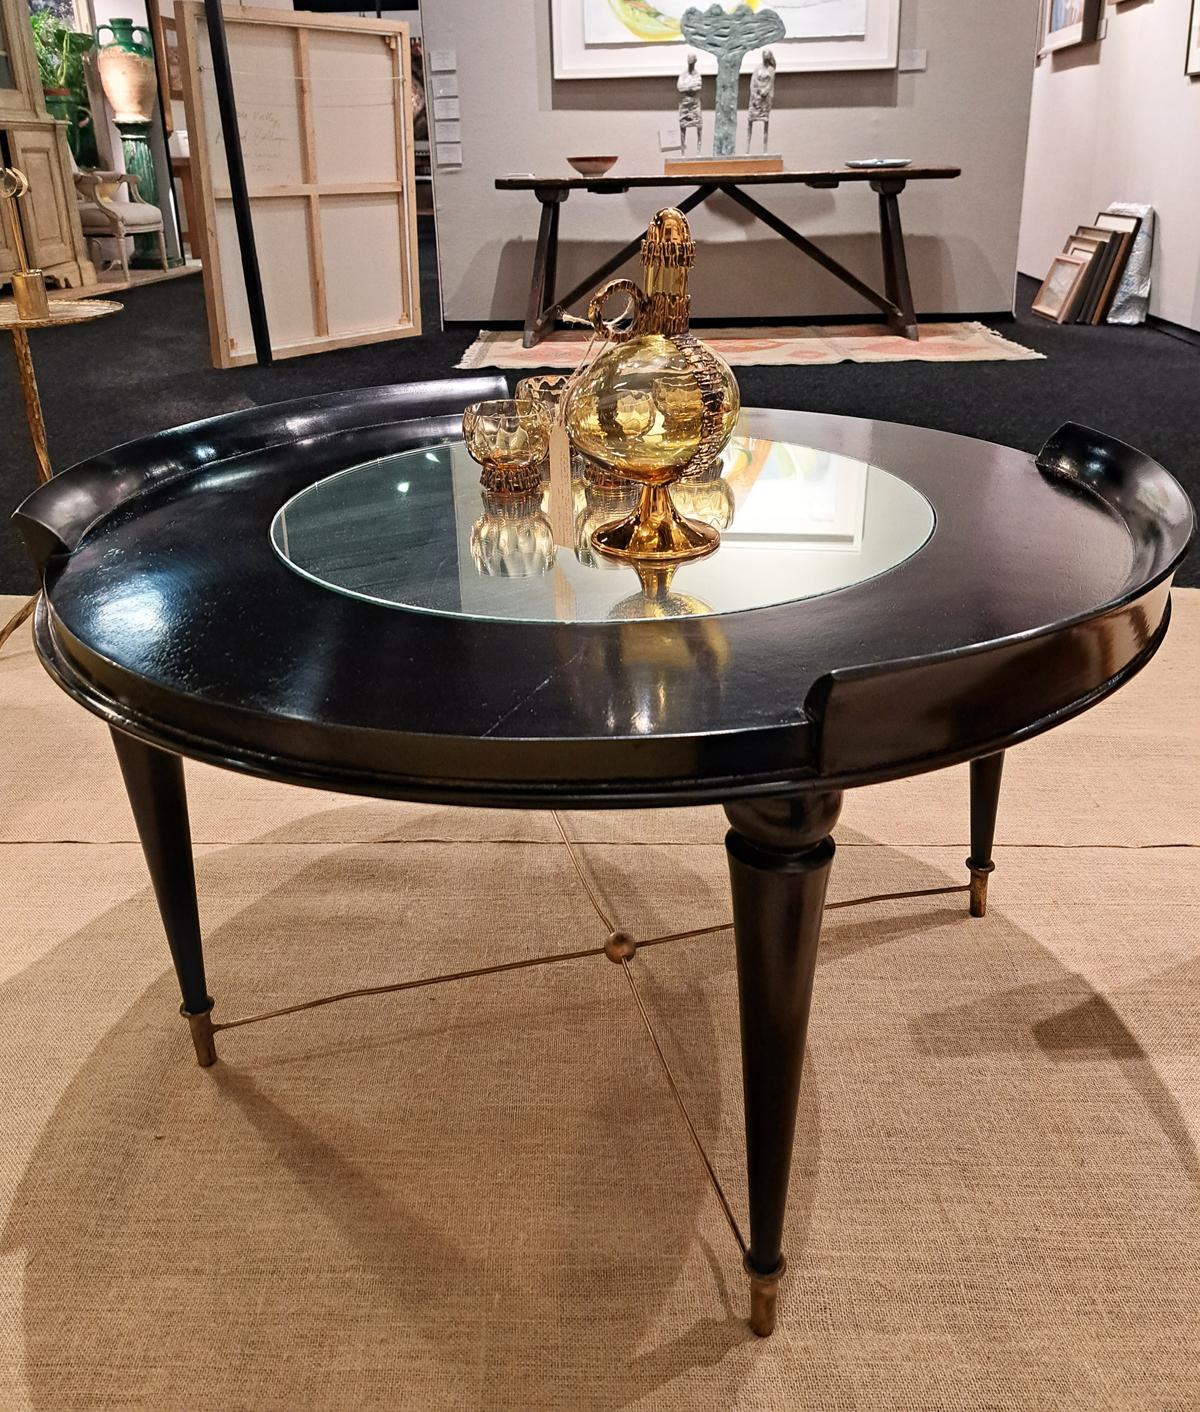 Metal Ebonized Round Coffee Table with a Mirrored Top, 1950s For Sale